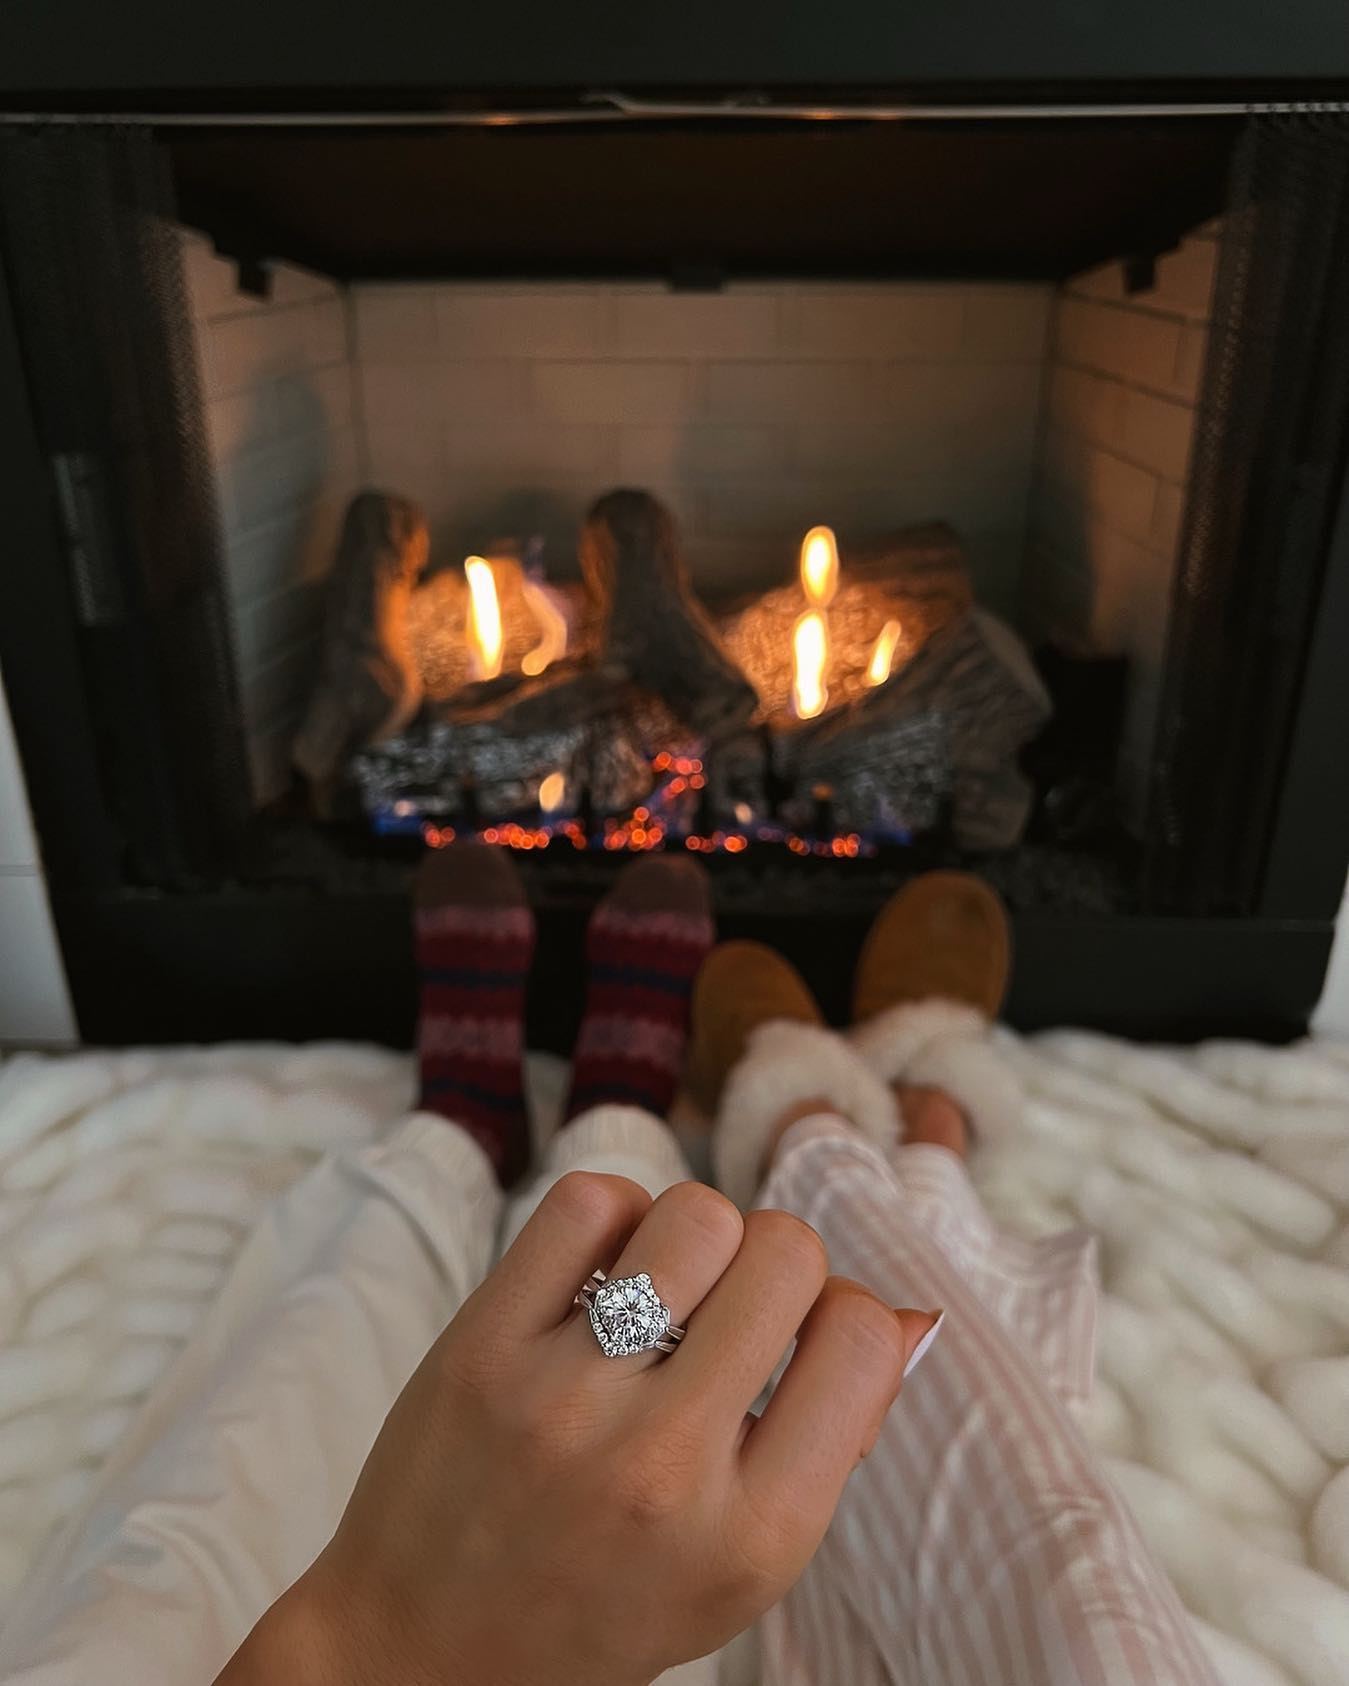 Insert us here ❄ (we'll take the sparklers too!)
💍rings: Engagement Ring in Platinum 1.8mm Width Band + Platinum Vintage Inspired Glamour Frame Diamond Wedding Ring
.
.
.
#jamesallen #jamesallenrings #diamond #diamonds #diamondring #engaged #engagement #engagementring #isaidyes #ringinspo #holidayseason #winter #winterstyle #winterengagement